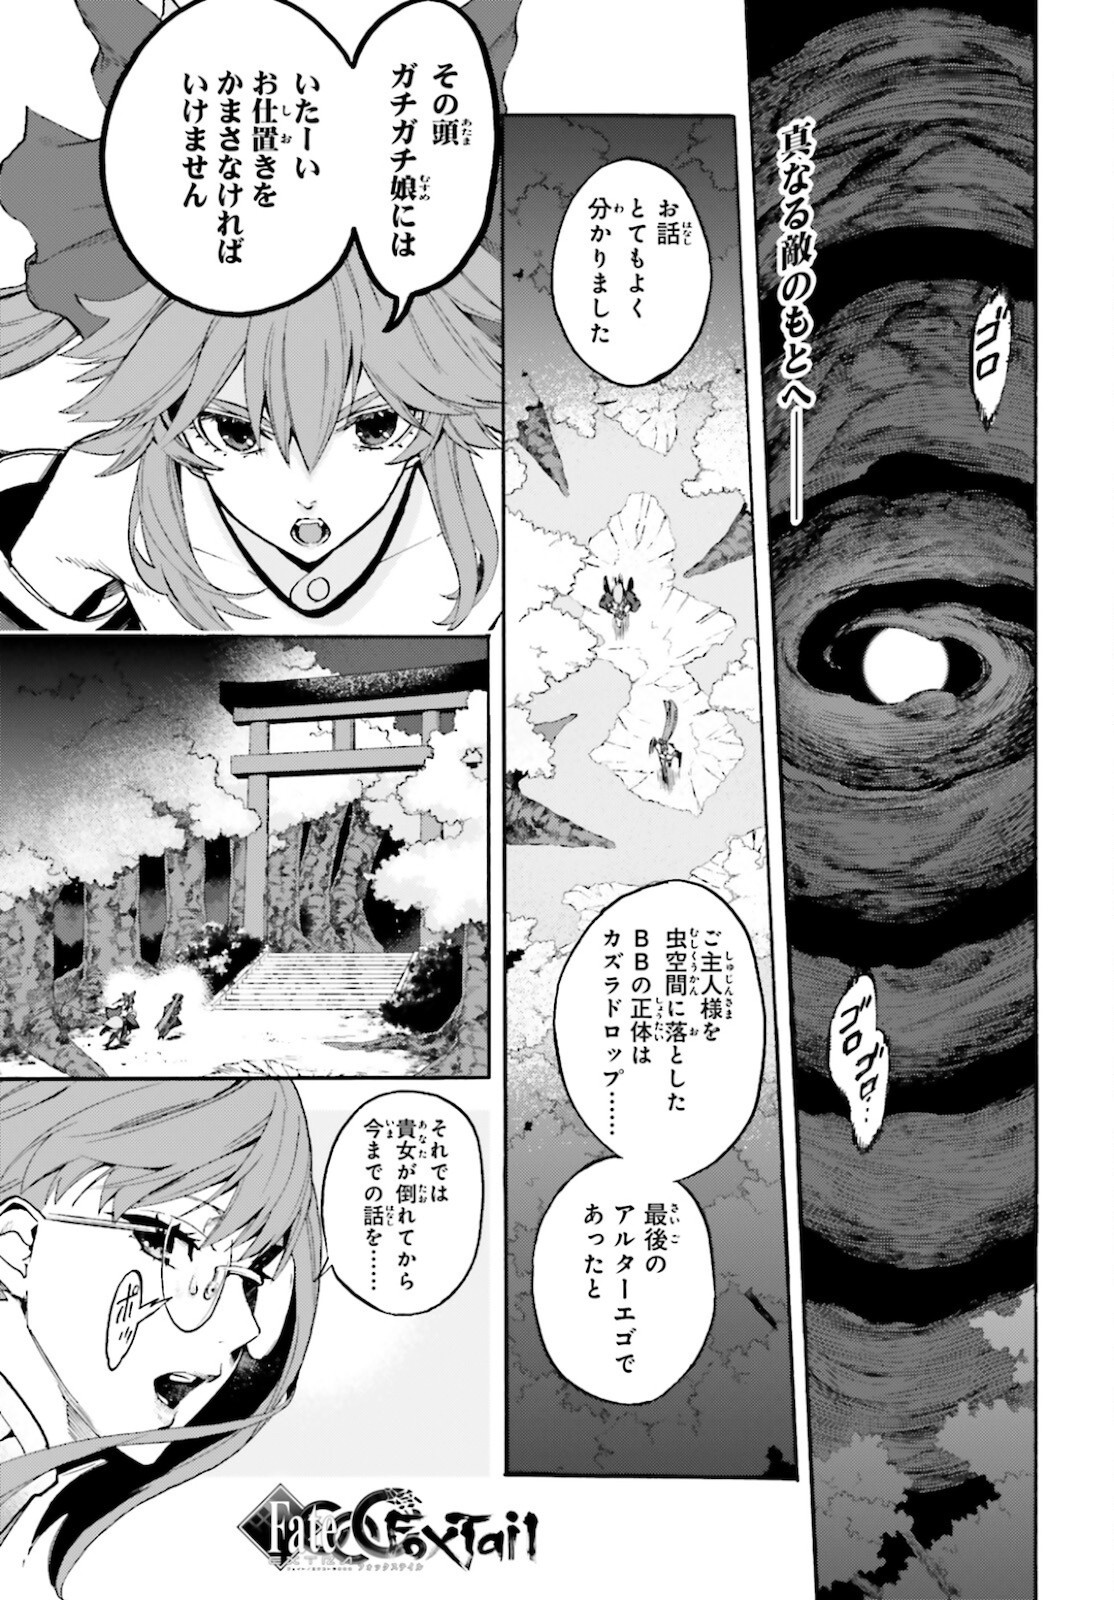 Fate Extra Ccc Fox Tail Chapter 66 Page 1 Raw Sen Manga